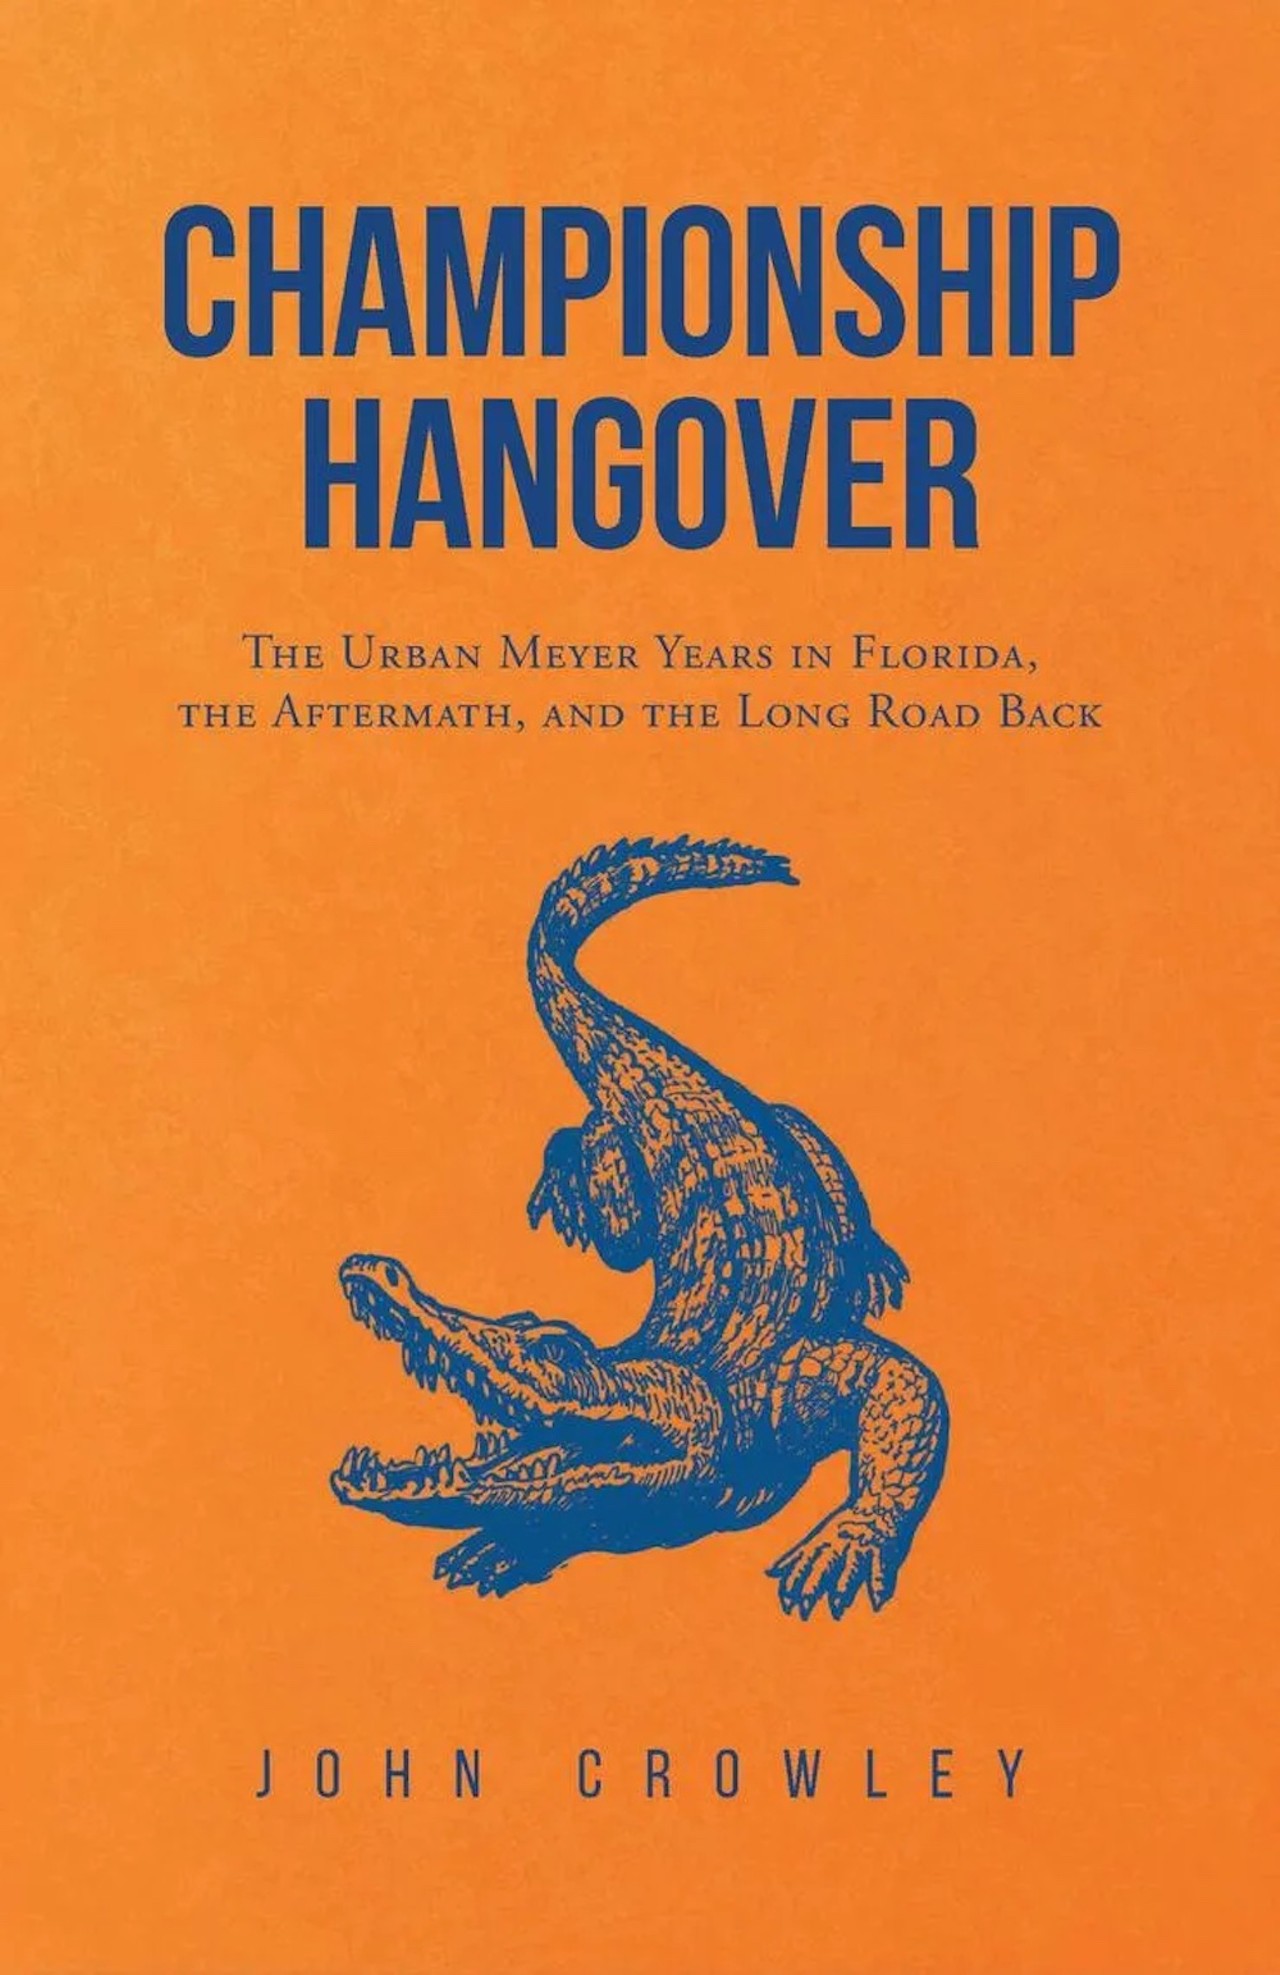 Championship Hangover: The Urban Meyer Years in Florida, the Aftermath, and the Long Road Back by John CrowleyThis one was published in 2021, but didn’t hit our eyeballs until after the pandemic. Crowley is a local product (and alum of Ybor City’s Booker T. Washington when it was a middle school) and former Seminole fan who was so shaken by the end of the Charlie Ward era that he switched alliances. His book reads like a diary entry and is strangely cathartic for anyone who’s ever been left in a lurch by their favorite team’s trials and tribulations. FFO: Danny Wuerffel, being non-committal about Urban Meyer’s off-field gaffes (Newman Springs Publishing, $13.95)